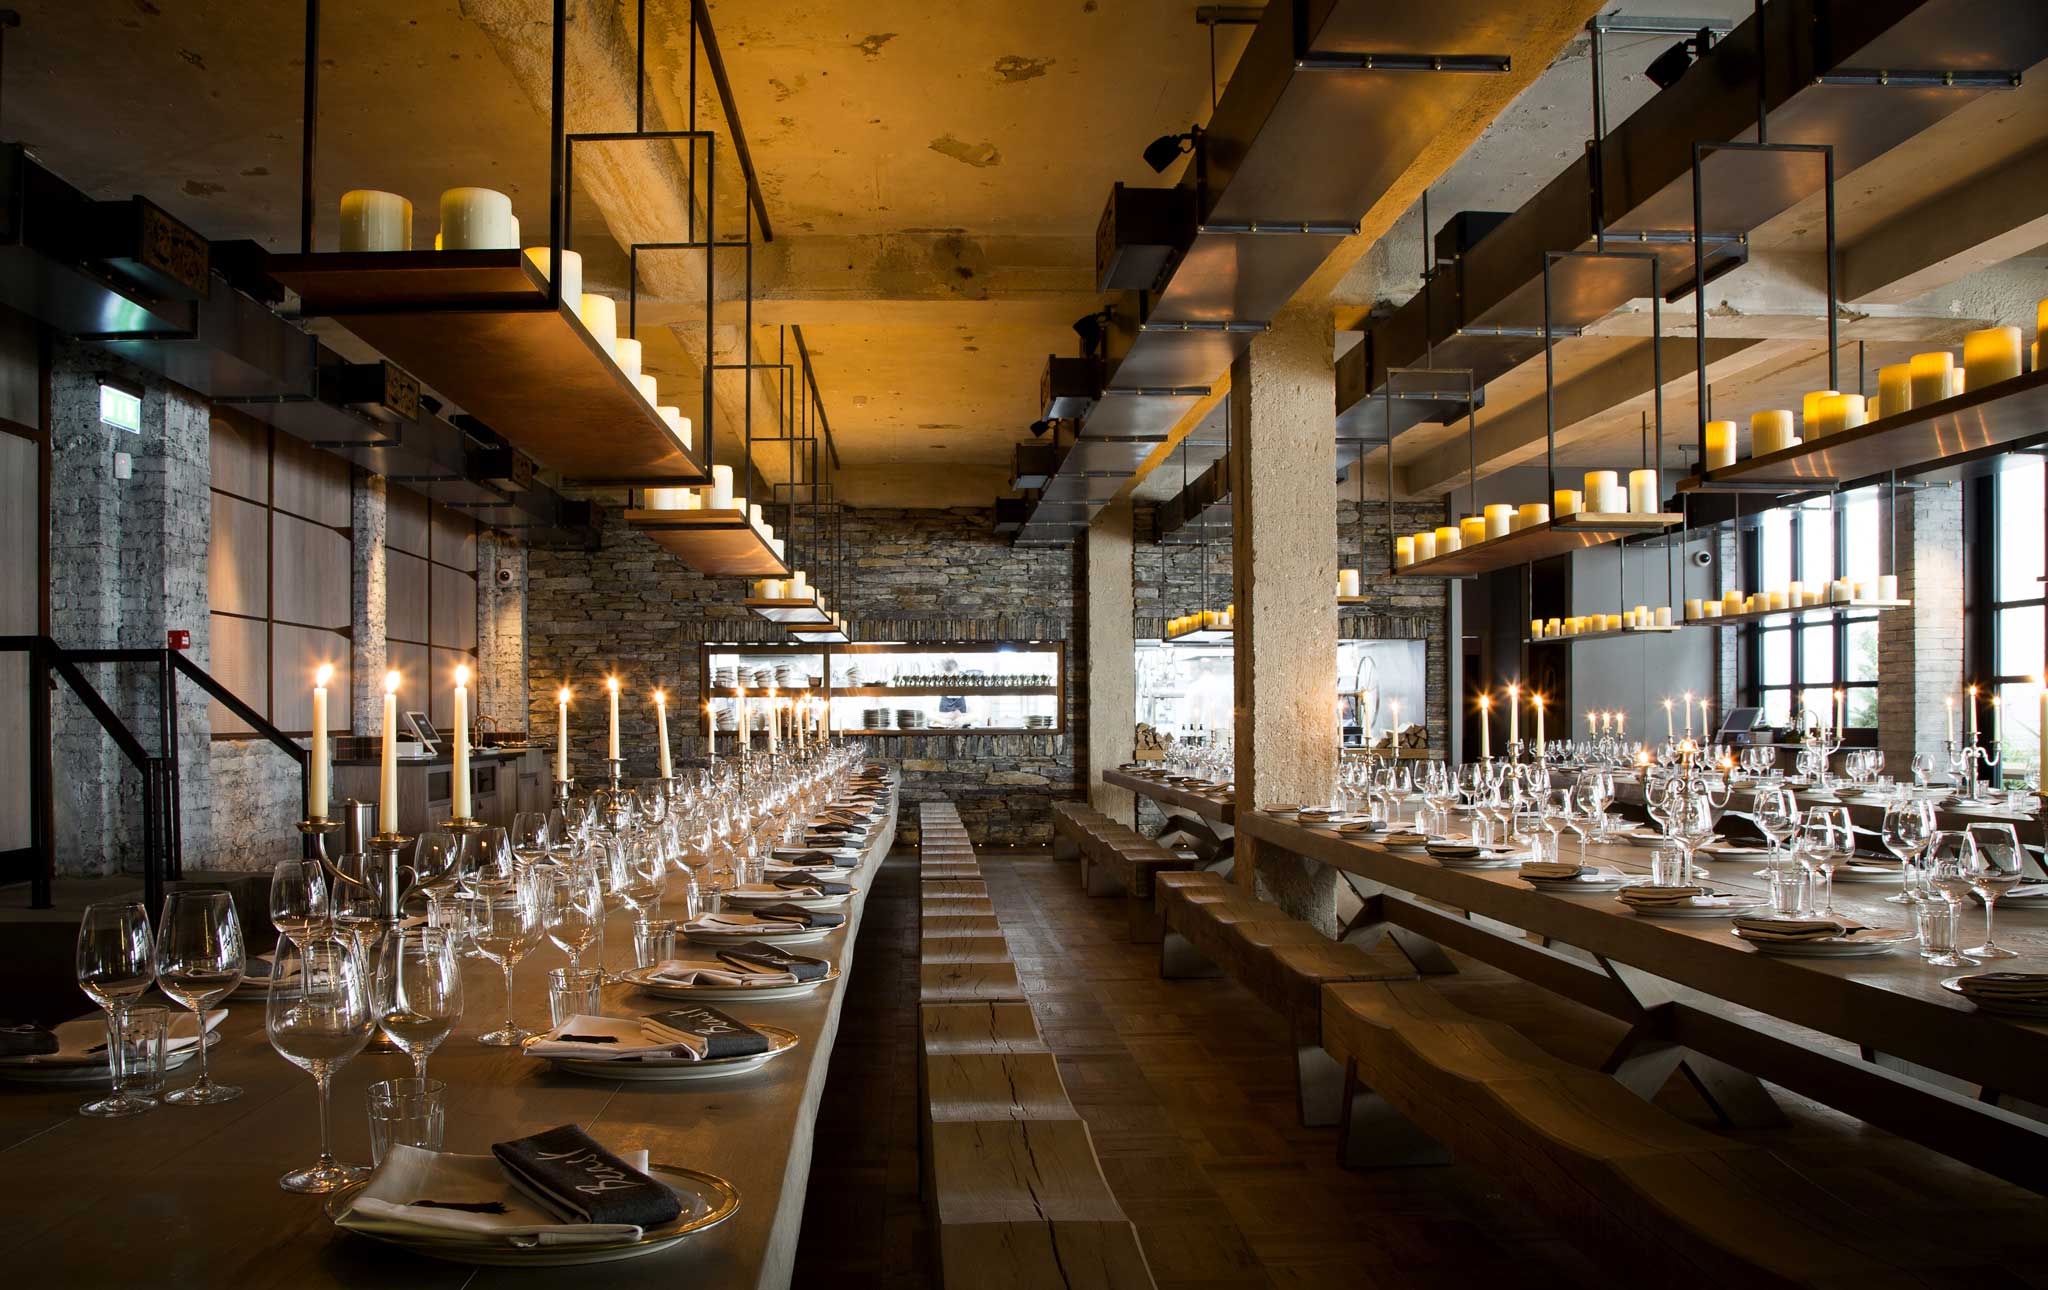 Experimental dining: The restaurant's concept is a 'medieval banquet with emphasis on sharing'